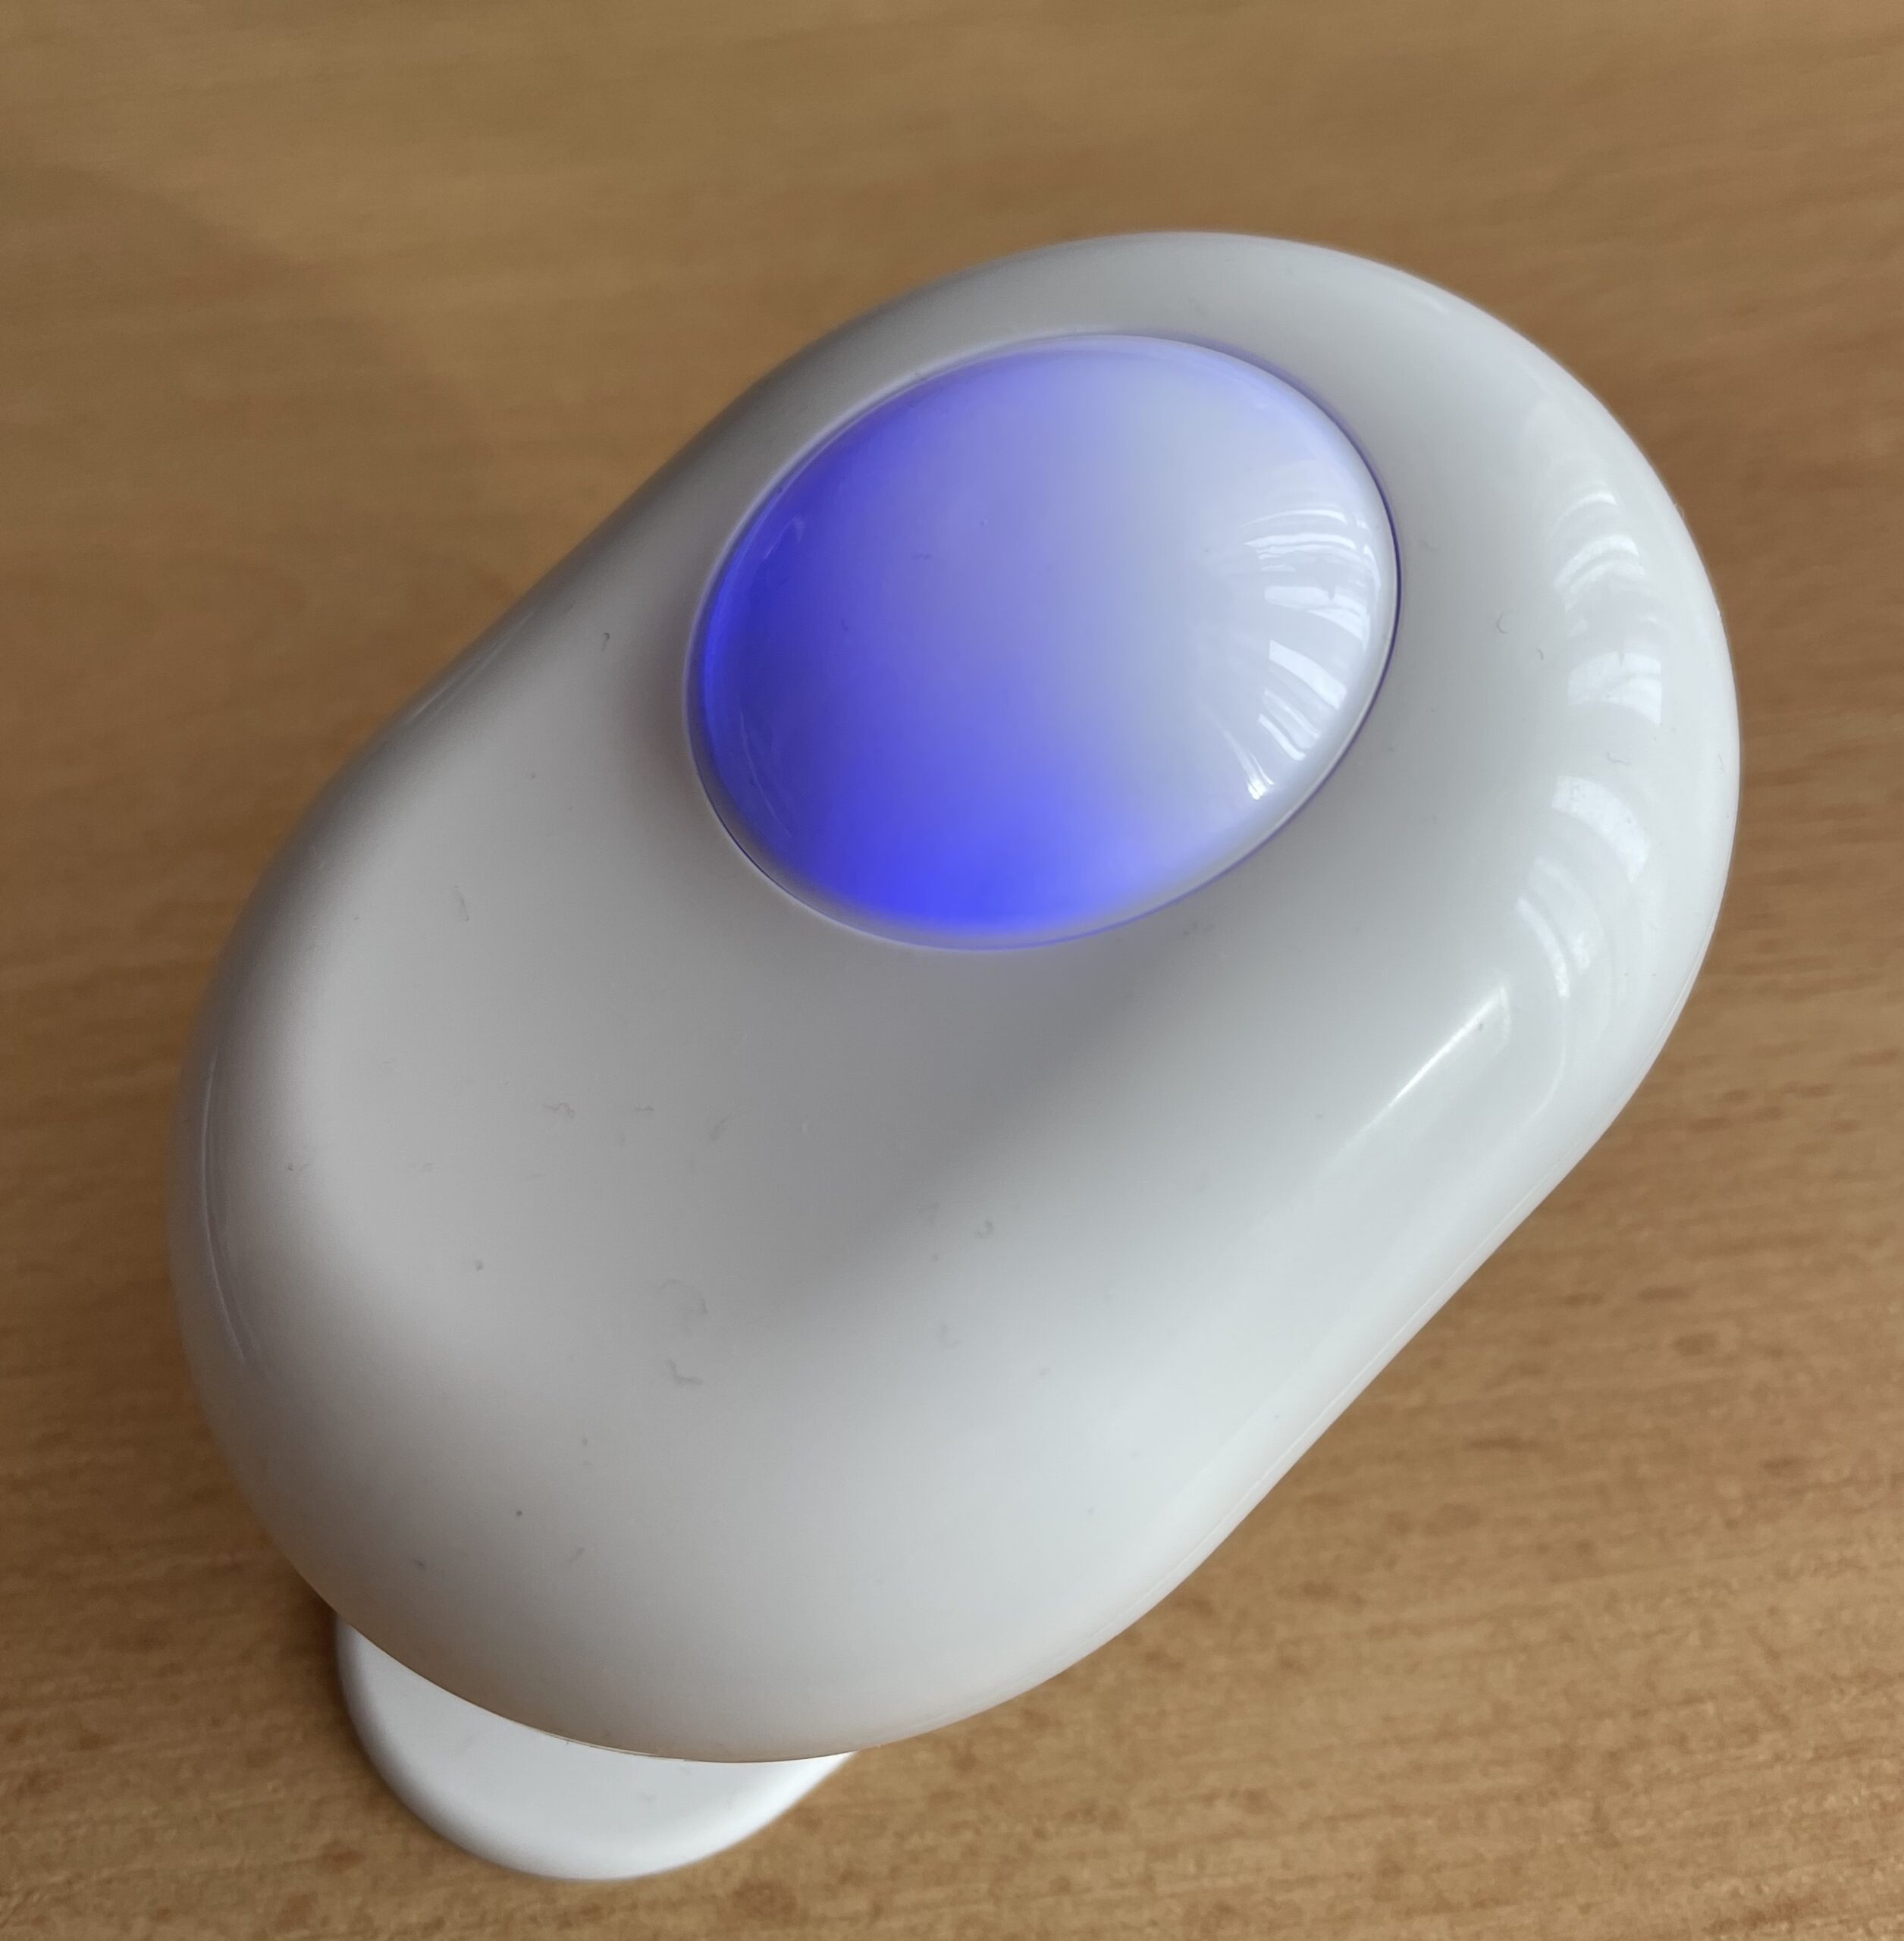 Shelly Motion Sensor picture with the LED glowing in blue